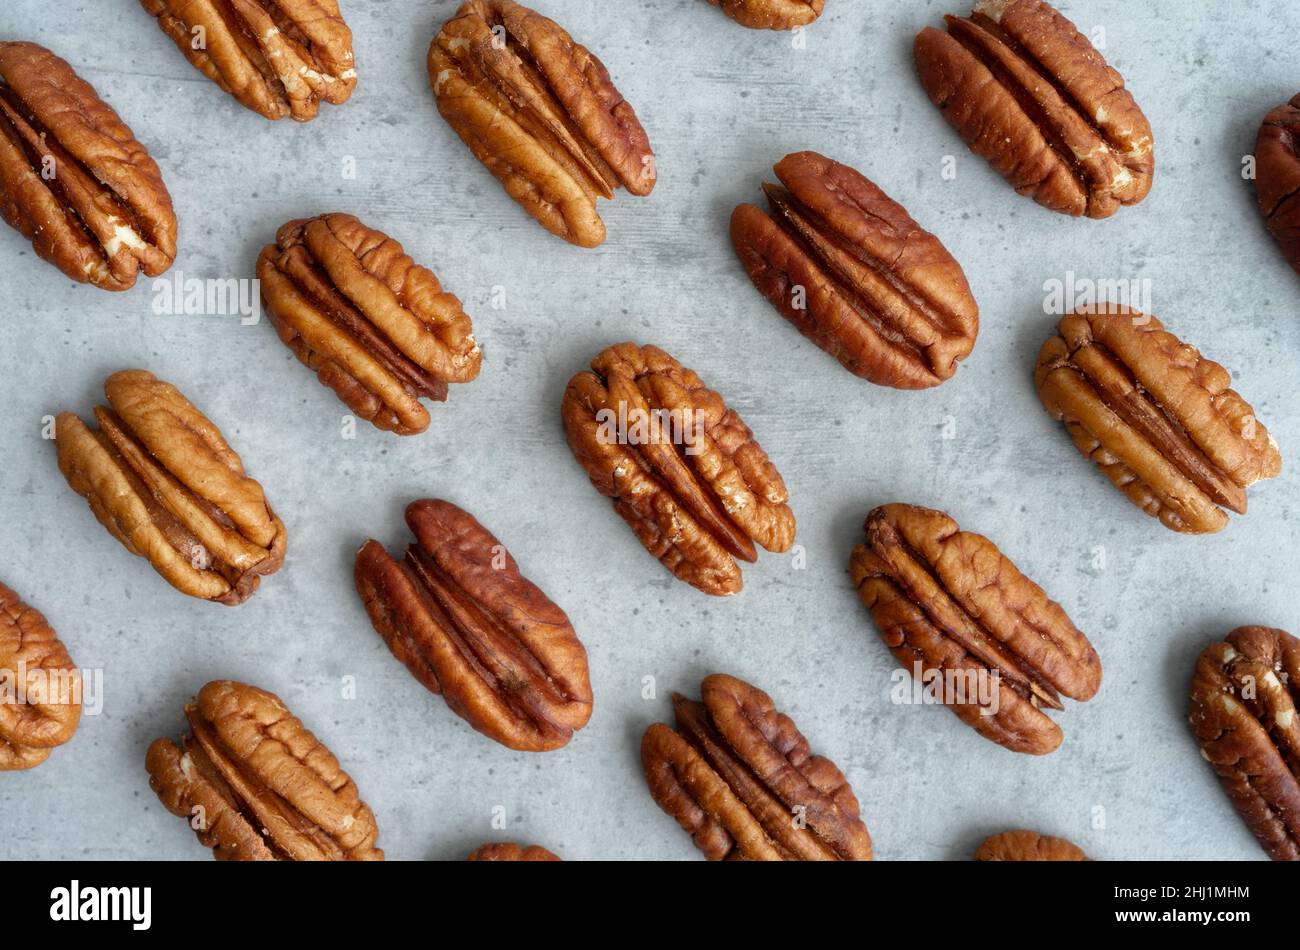 Pecan pattern on gray background, close-up Stock Photo